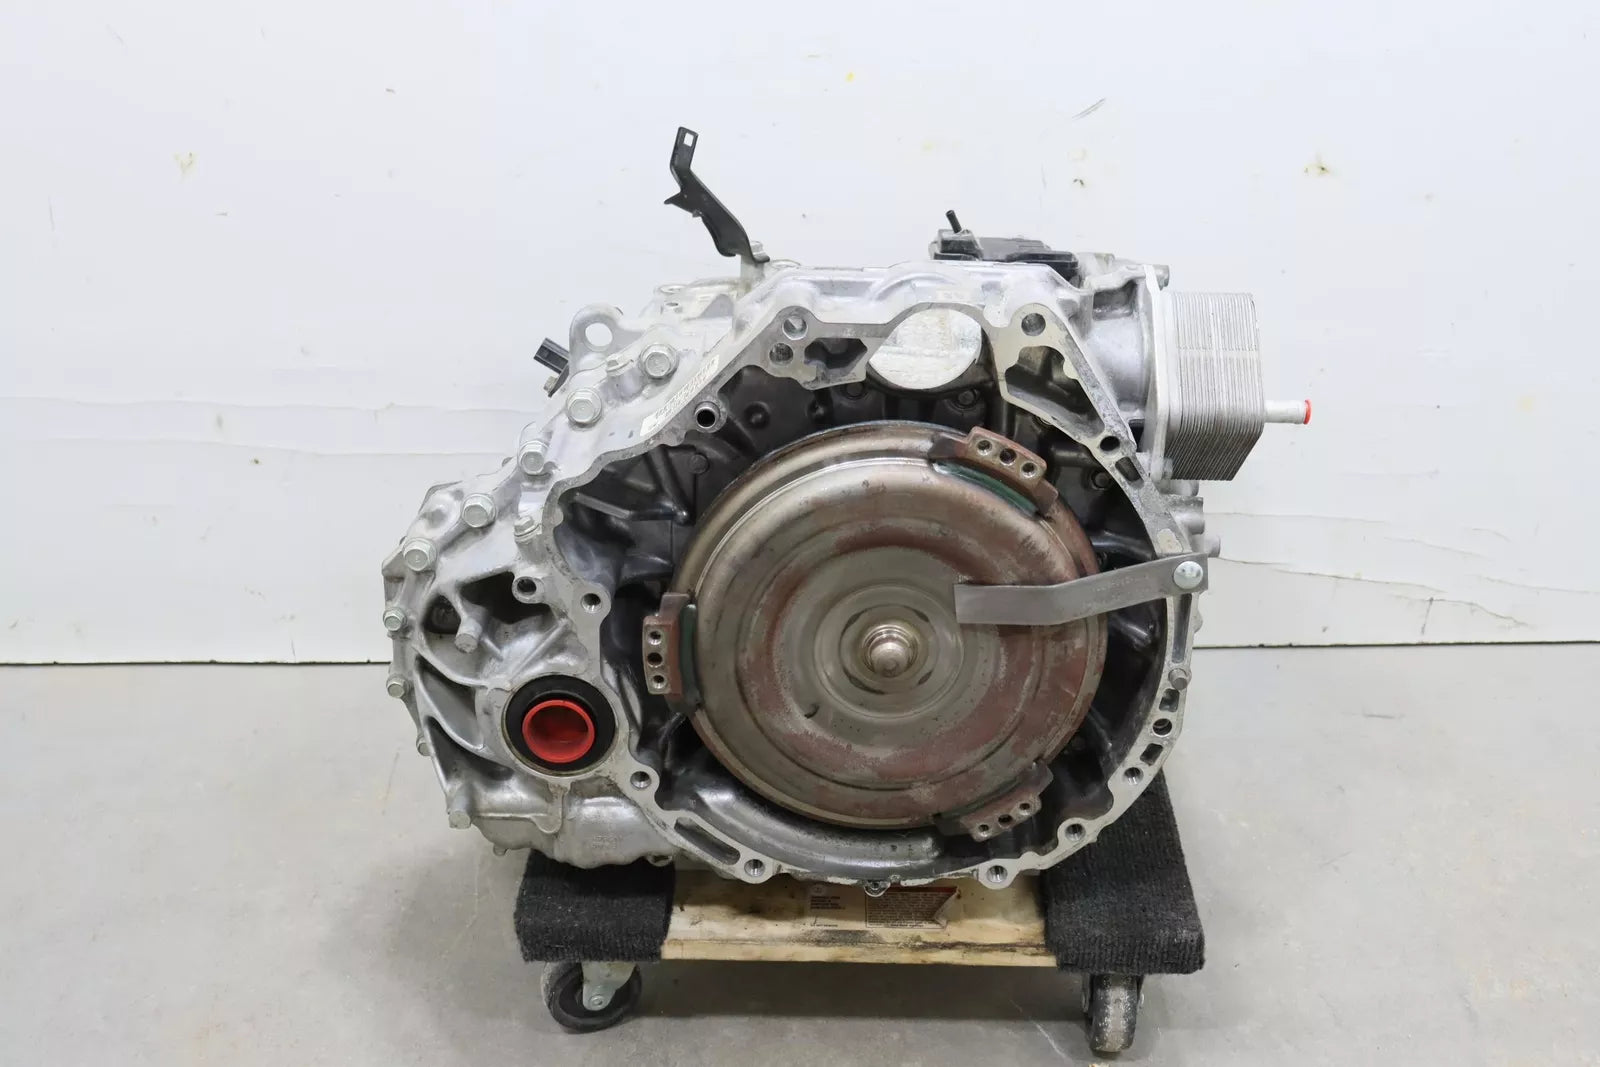 Honda Odyssey 10-speed automatic transmission from 2006 to 2023